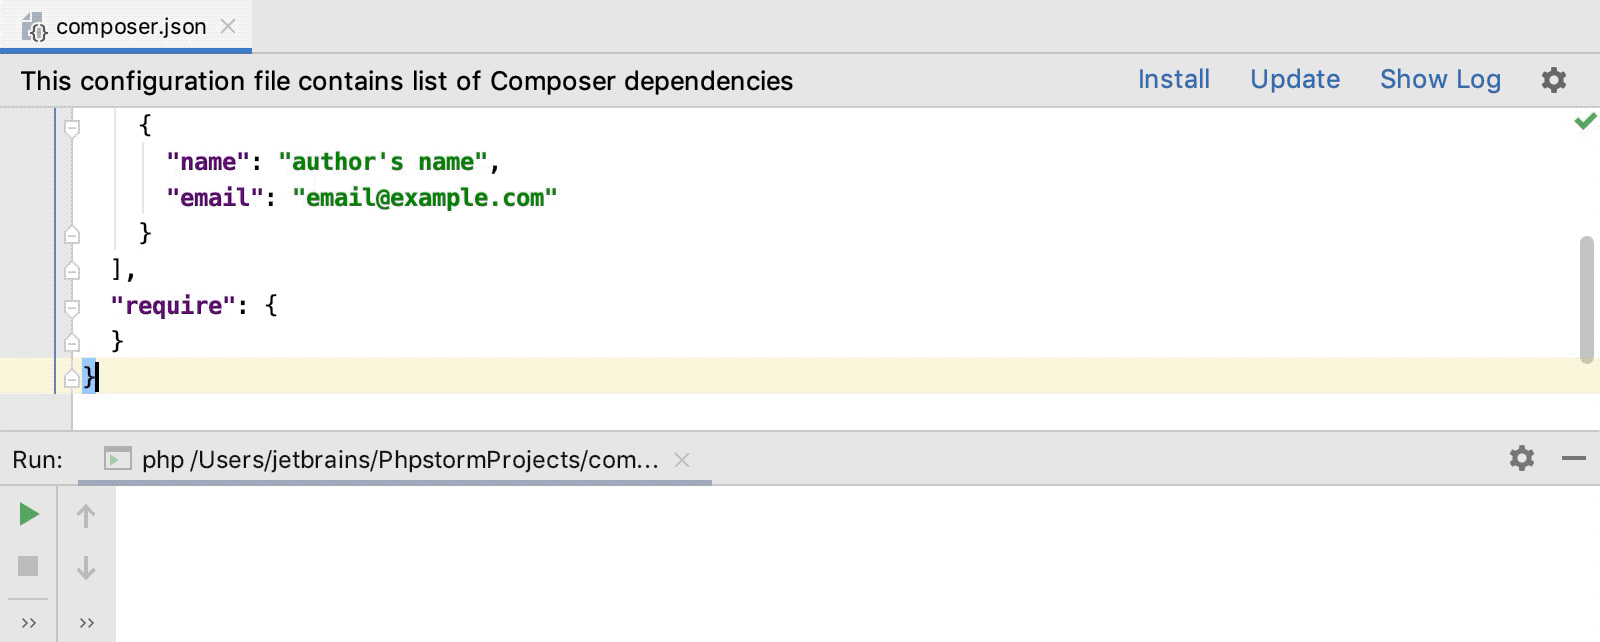 Running a composer command